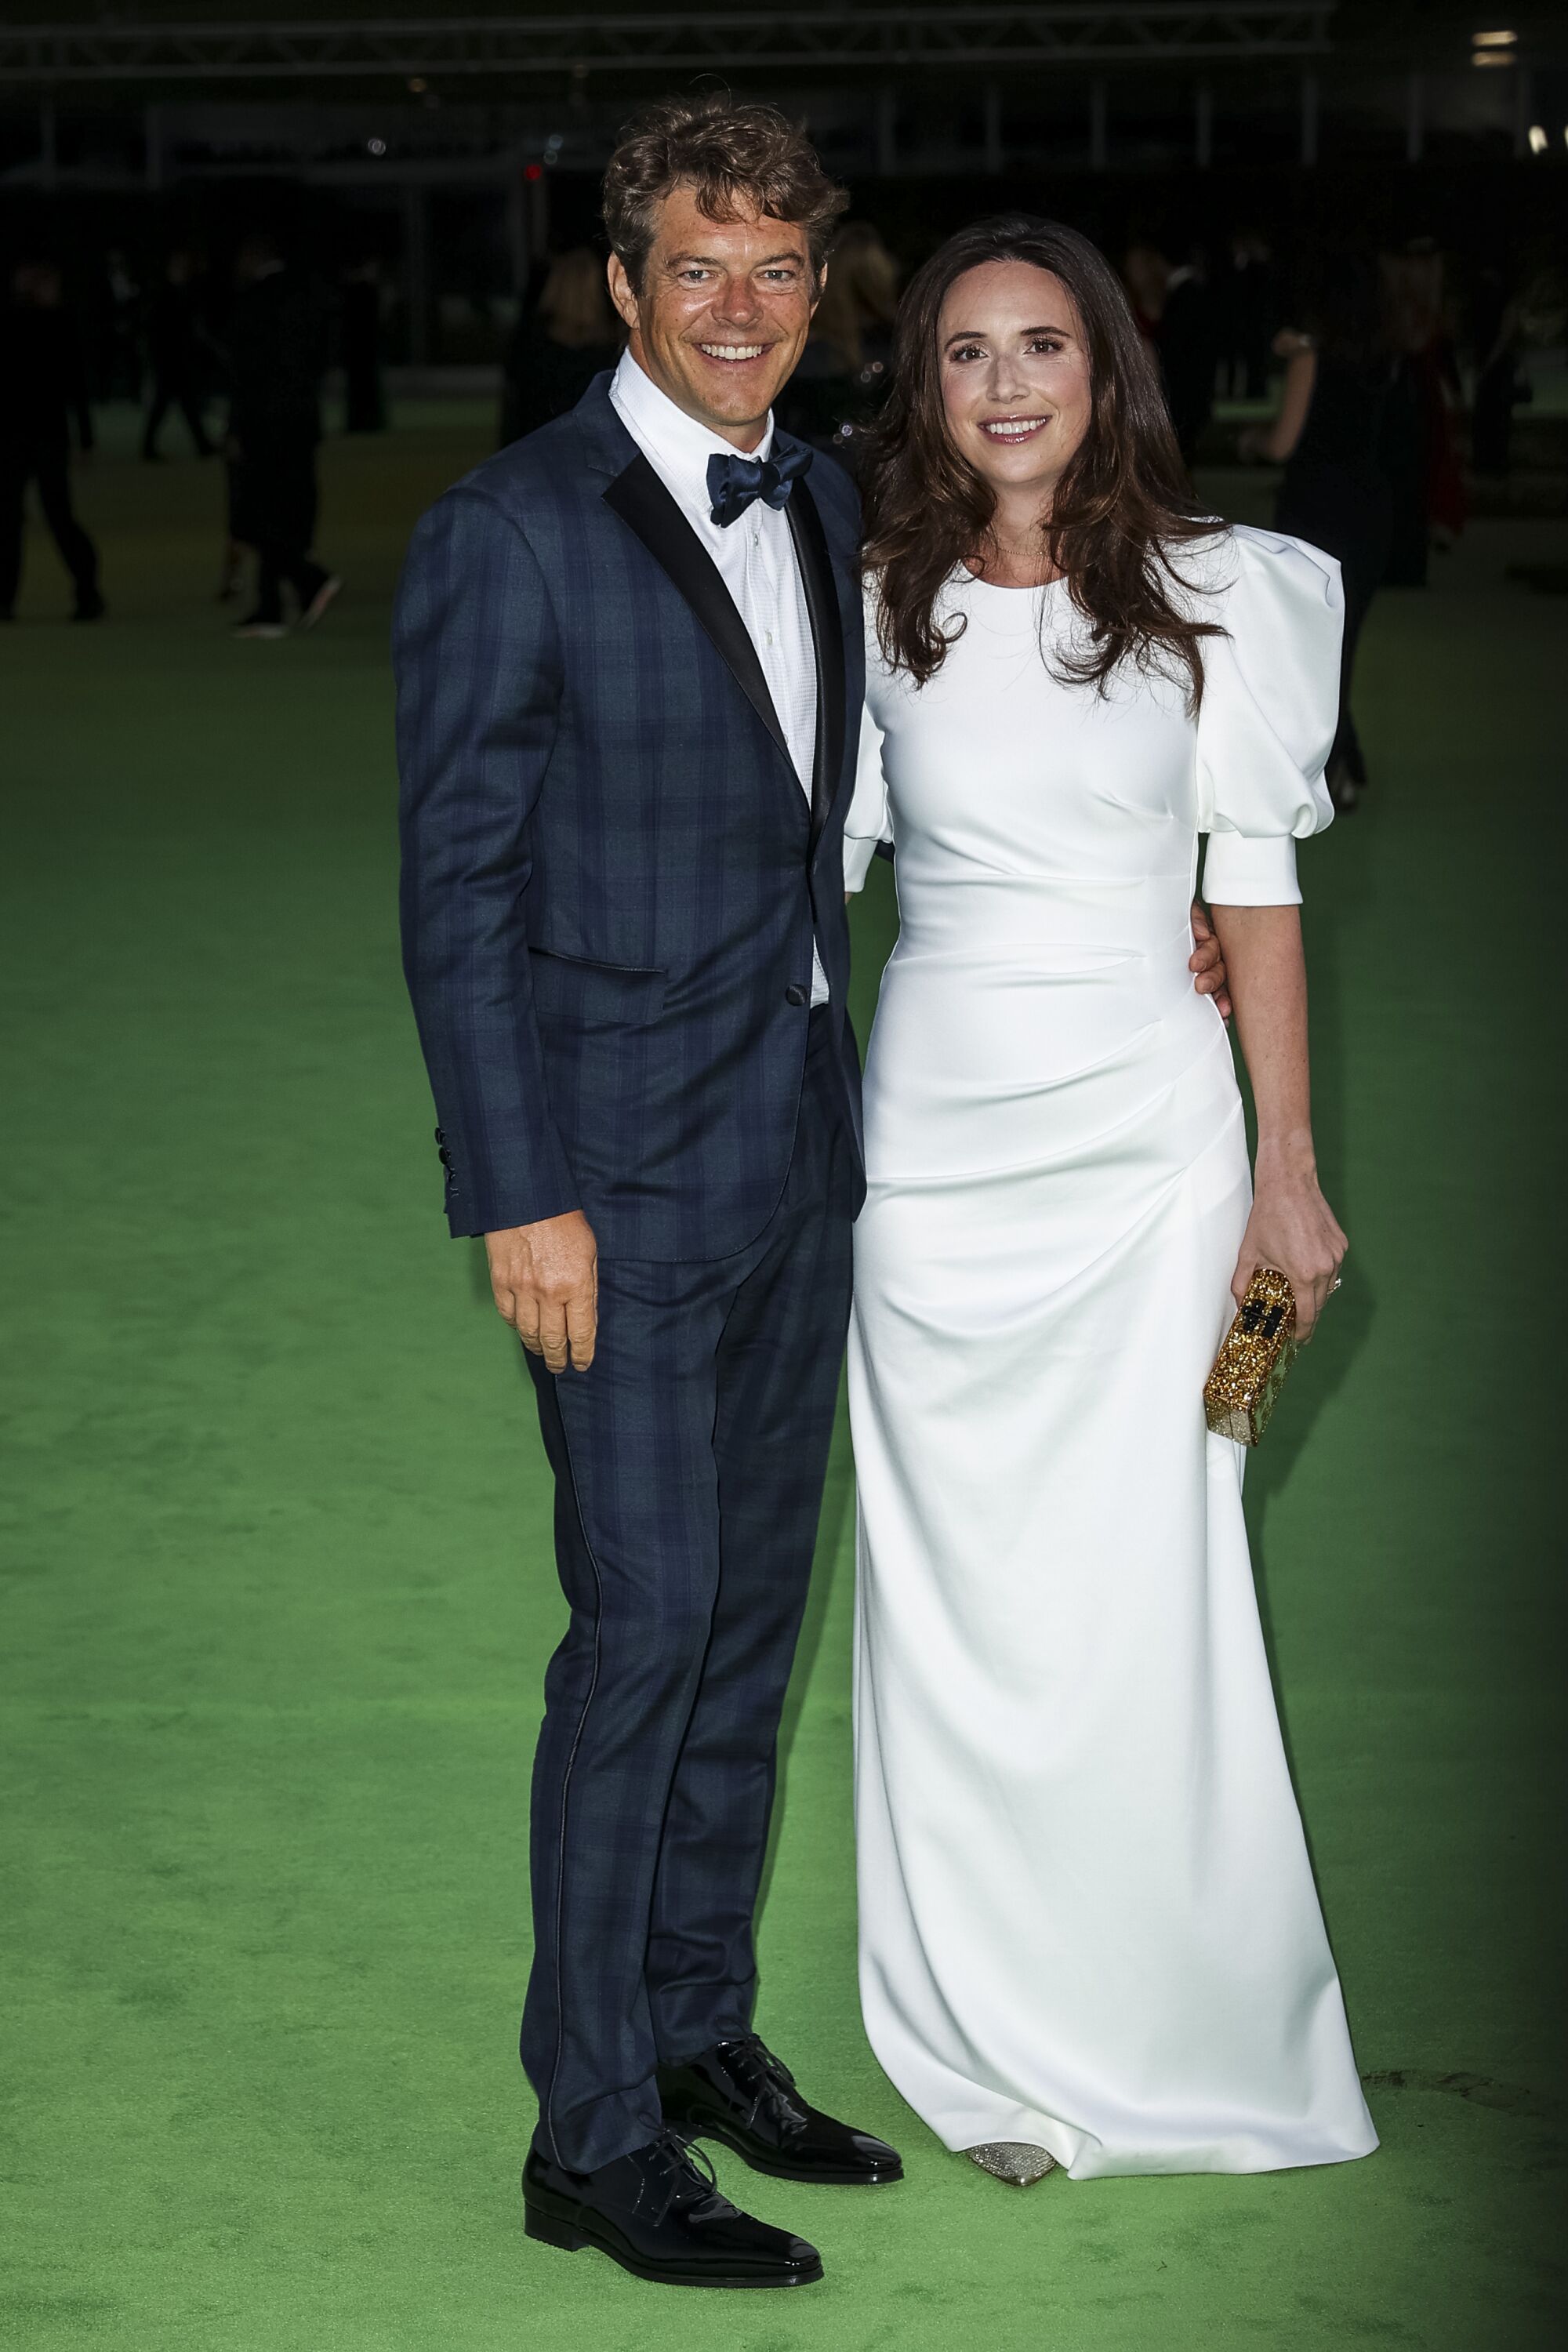 A man in a plaid, blue tuxedo and a woman in a white dress posing on a green carpet